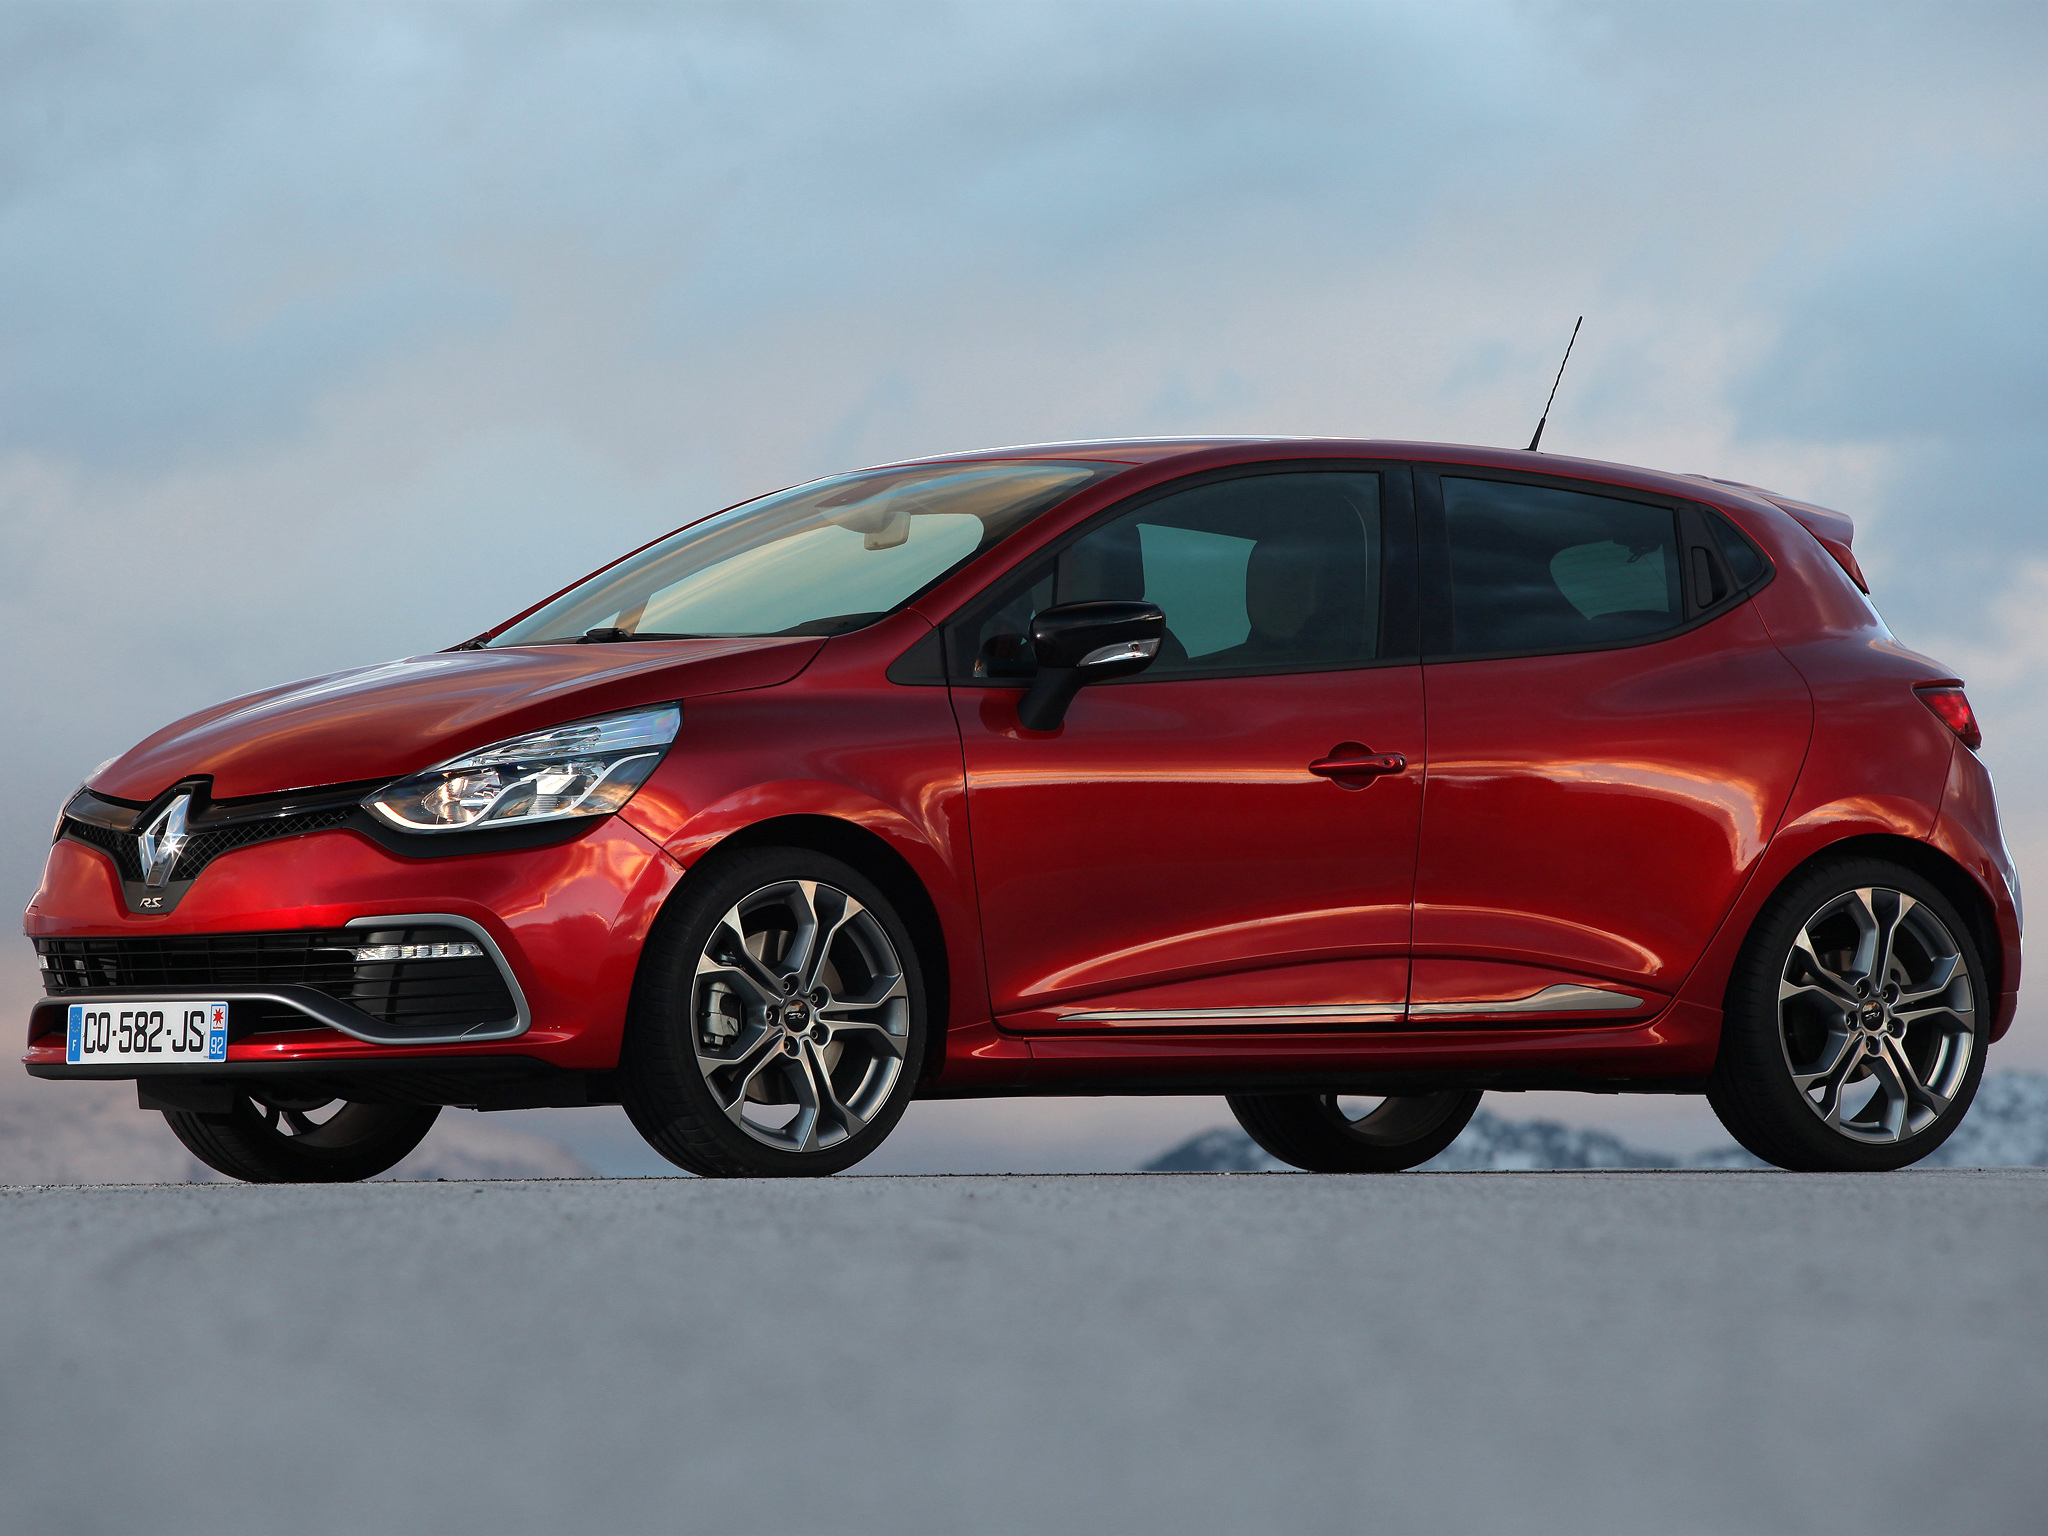 Renault Clio Renault Red Car Compact Car Car Vehicle 2048x1536